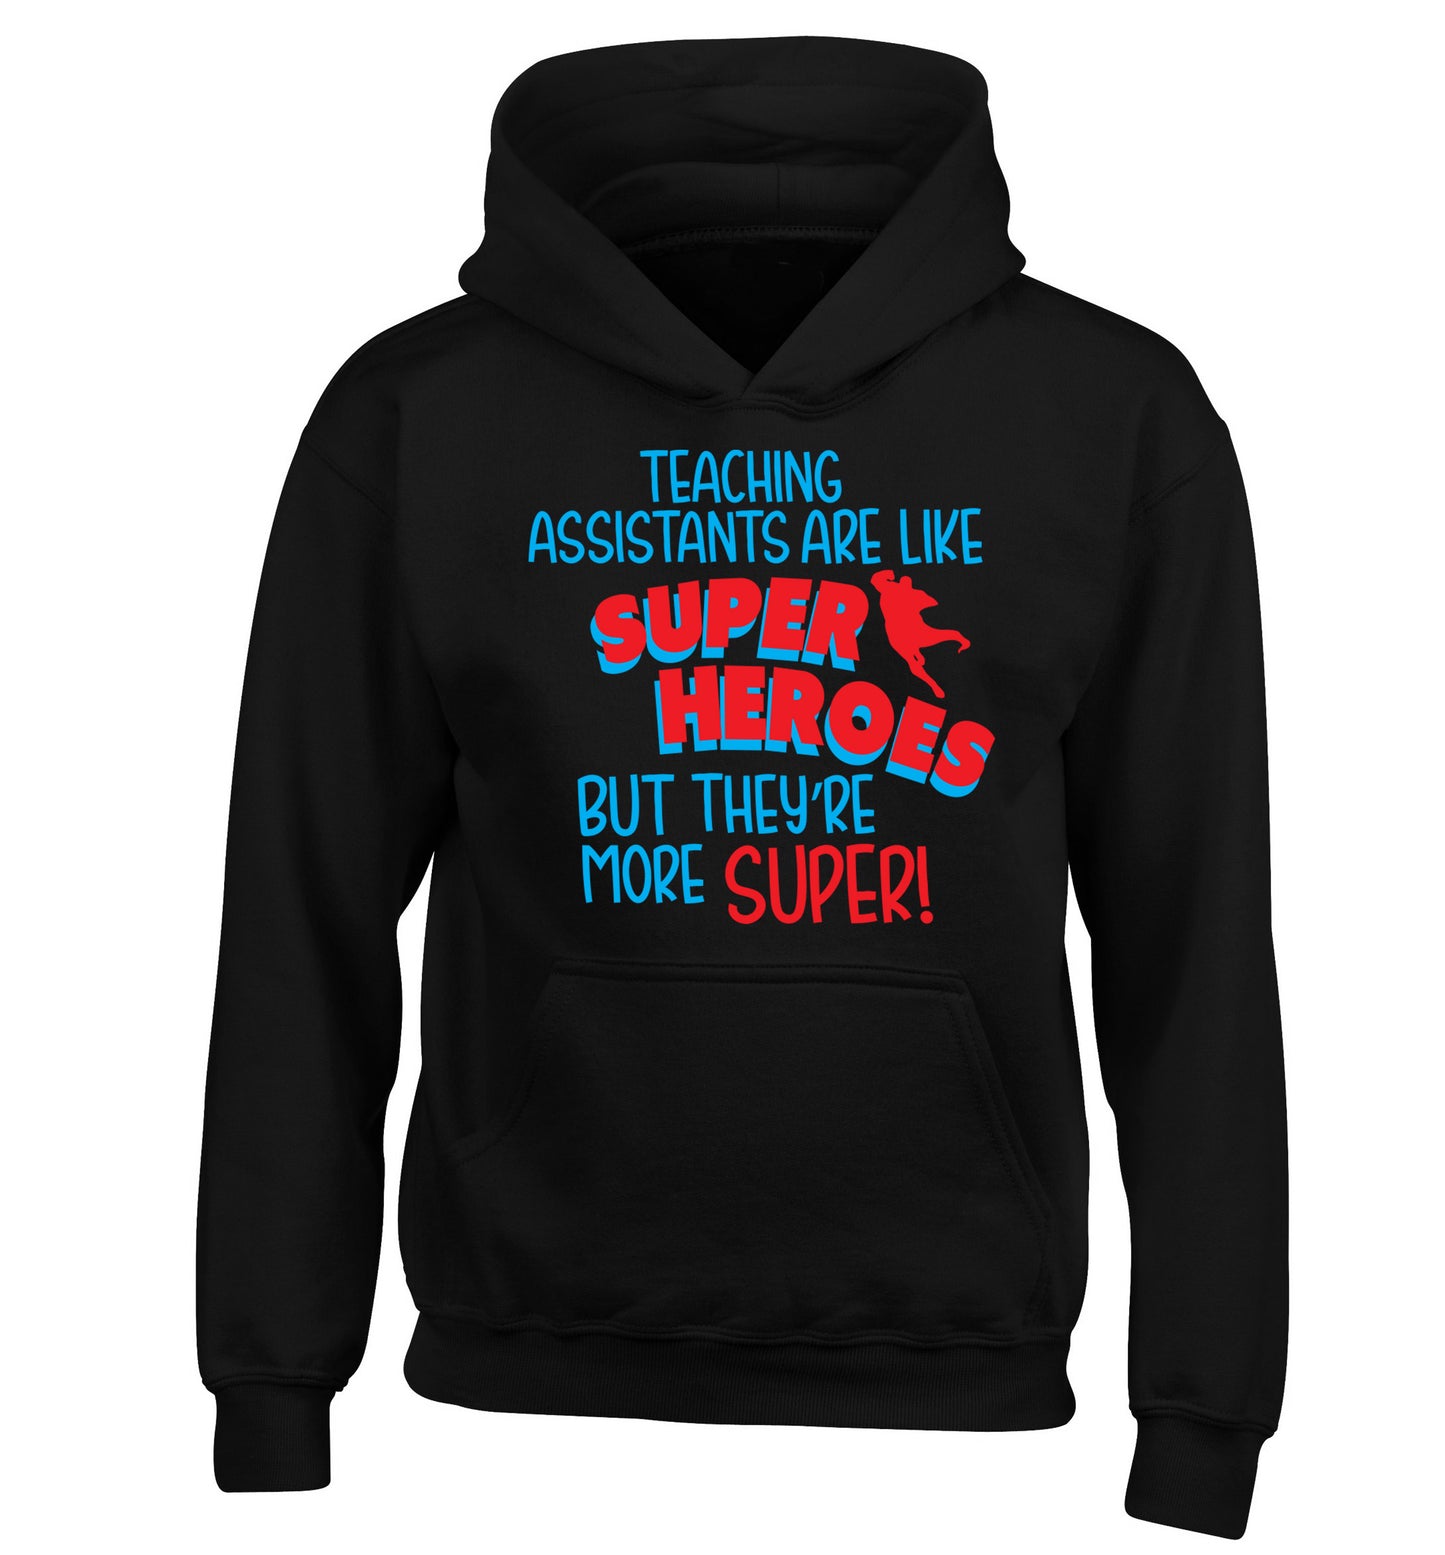 Teaching assistants are like superheros but they're more super children's black hoodie 12-13 Years